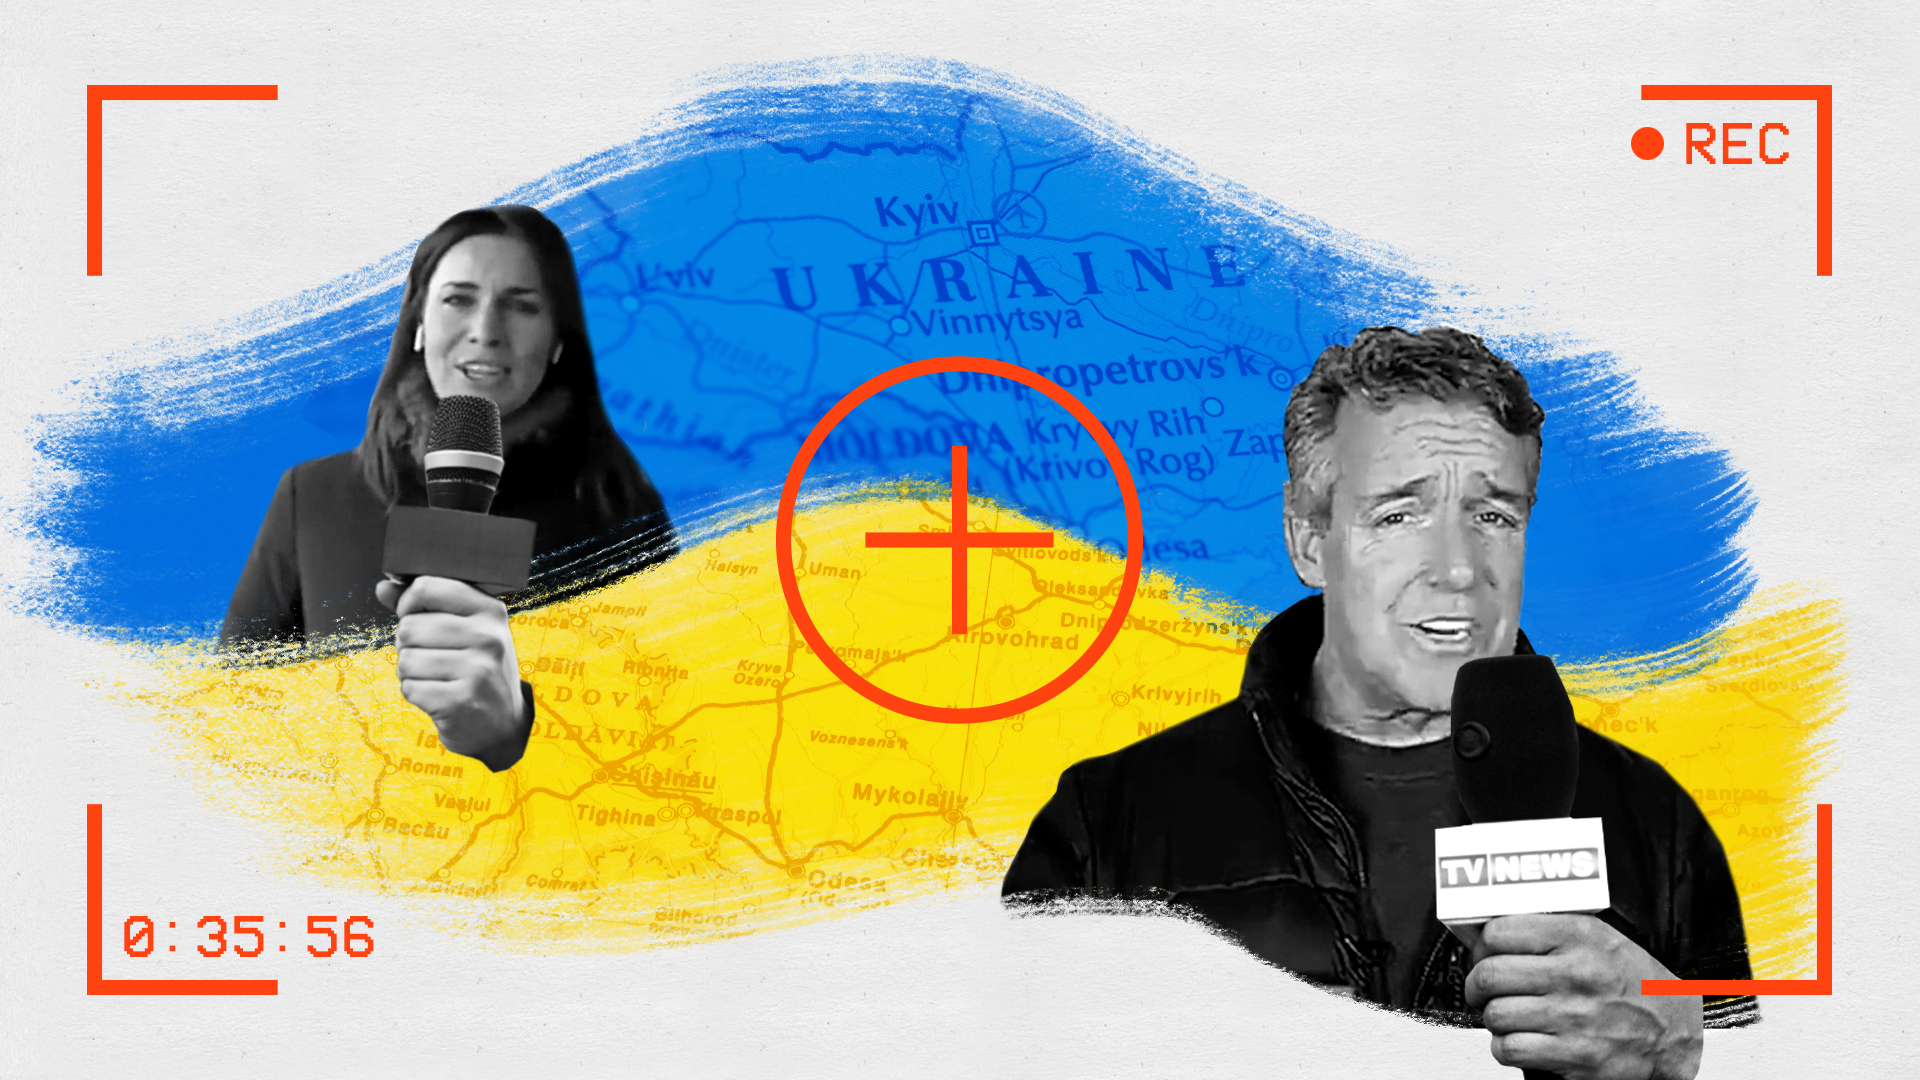 Covering Ukraine: A mean streak of racist exceptionalism